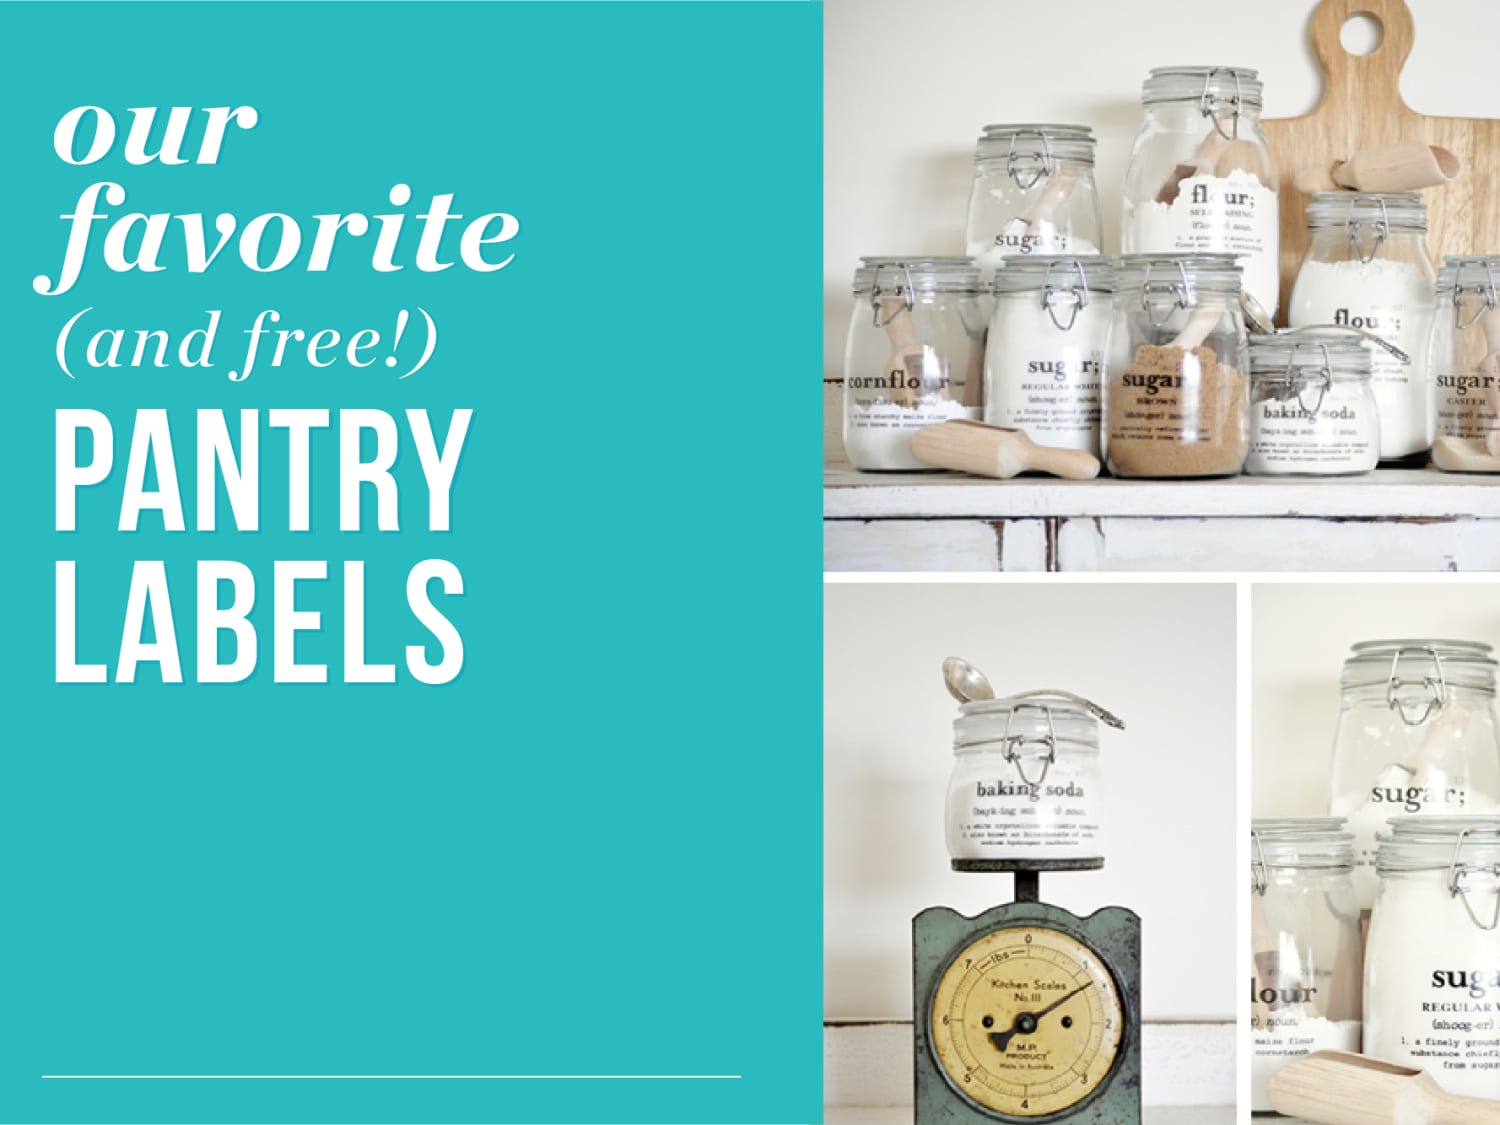 Easy-to-Use Printable Pantry Labels (That Look Amazing Too!) - The Homes I  Have Made